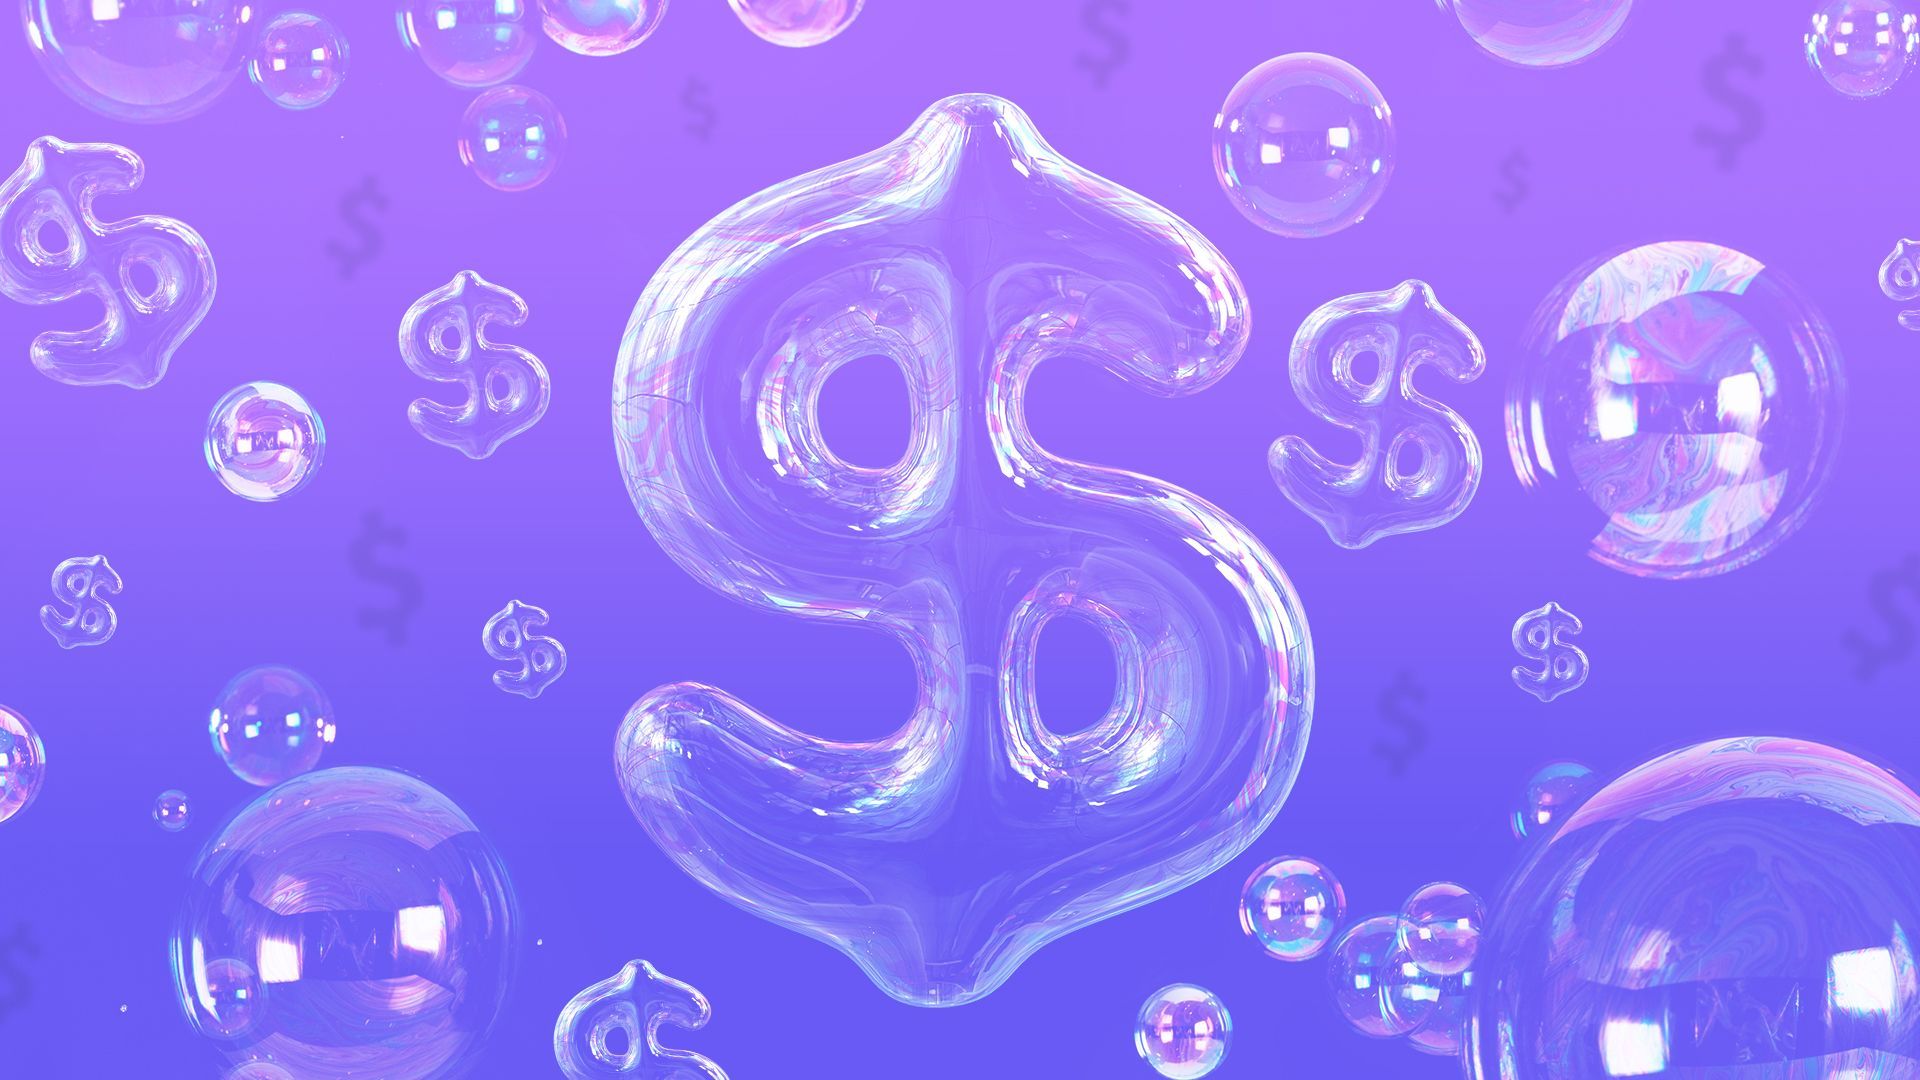 Illustration of bubbles, some in the shape of dollar signs